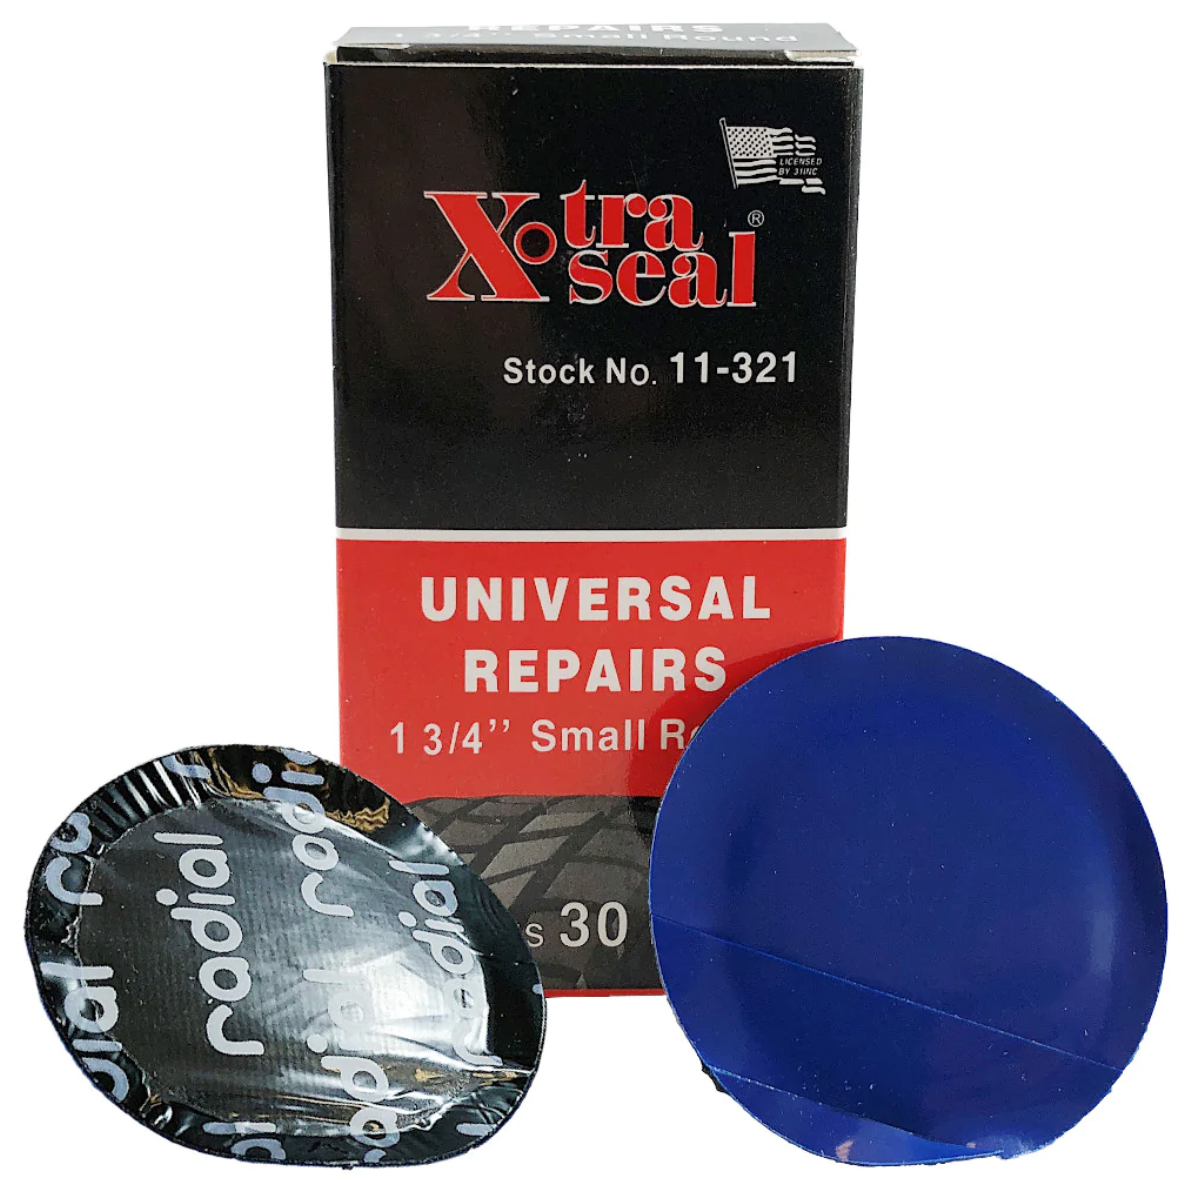 Xtra Seal 1 3/4" Small Round Universal Tire Patches